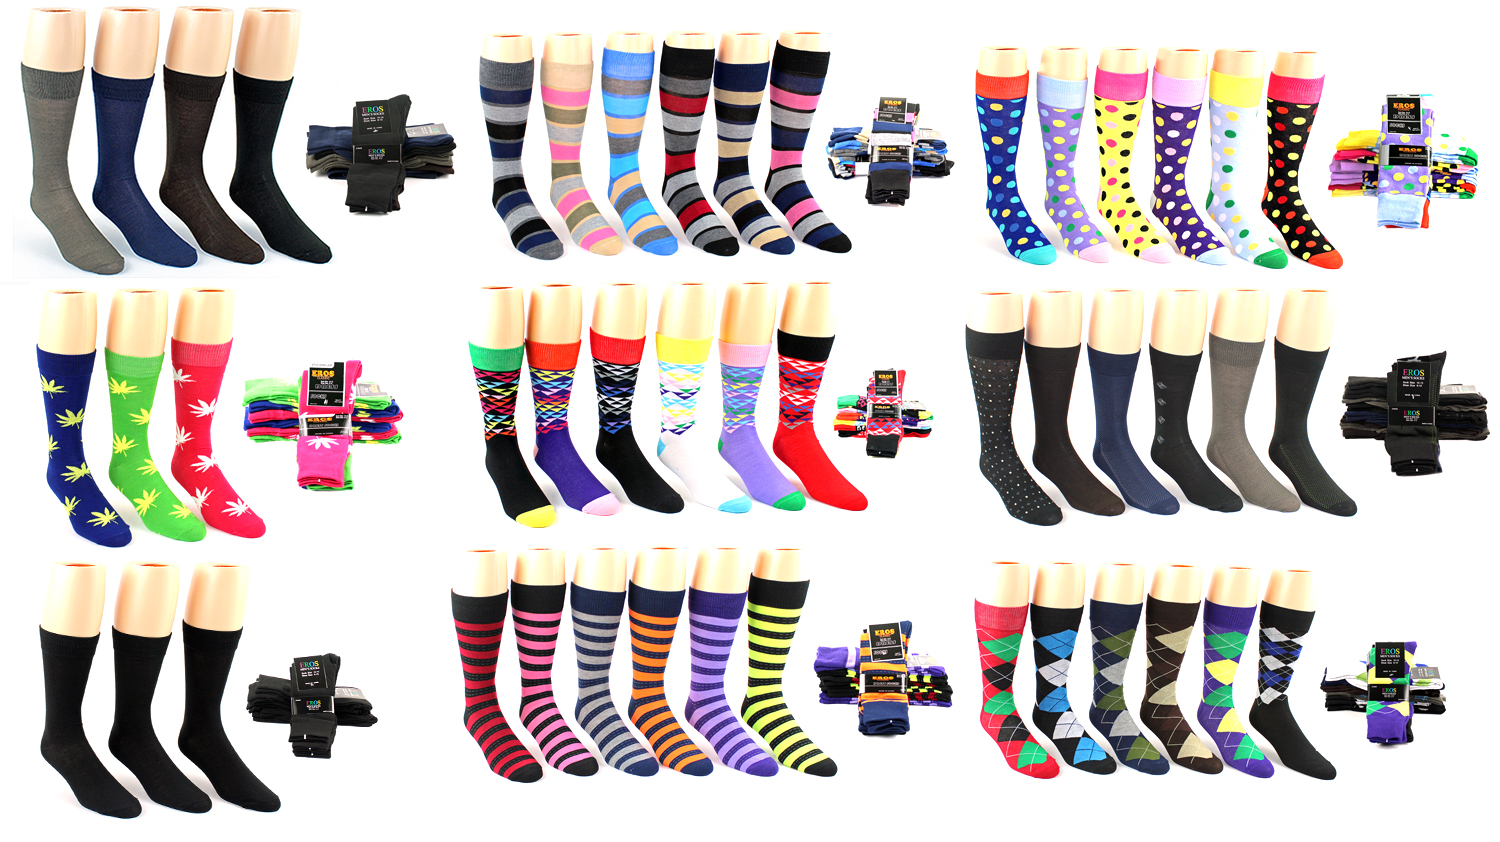 WHOLESALE JOBLOT OF 120 Or 240 Or 480 X PAIR MENS SUIT SOCKS 90000 AVAILABLE